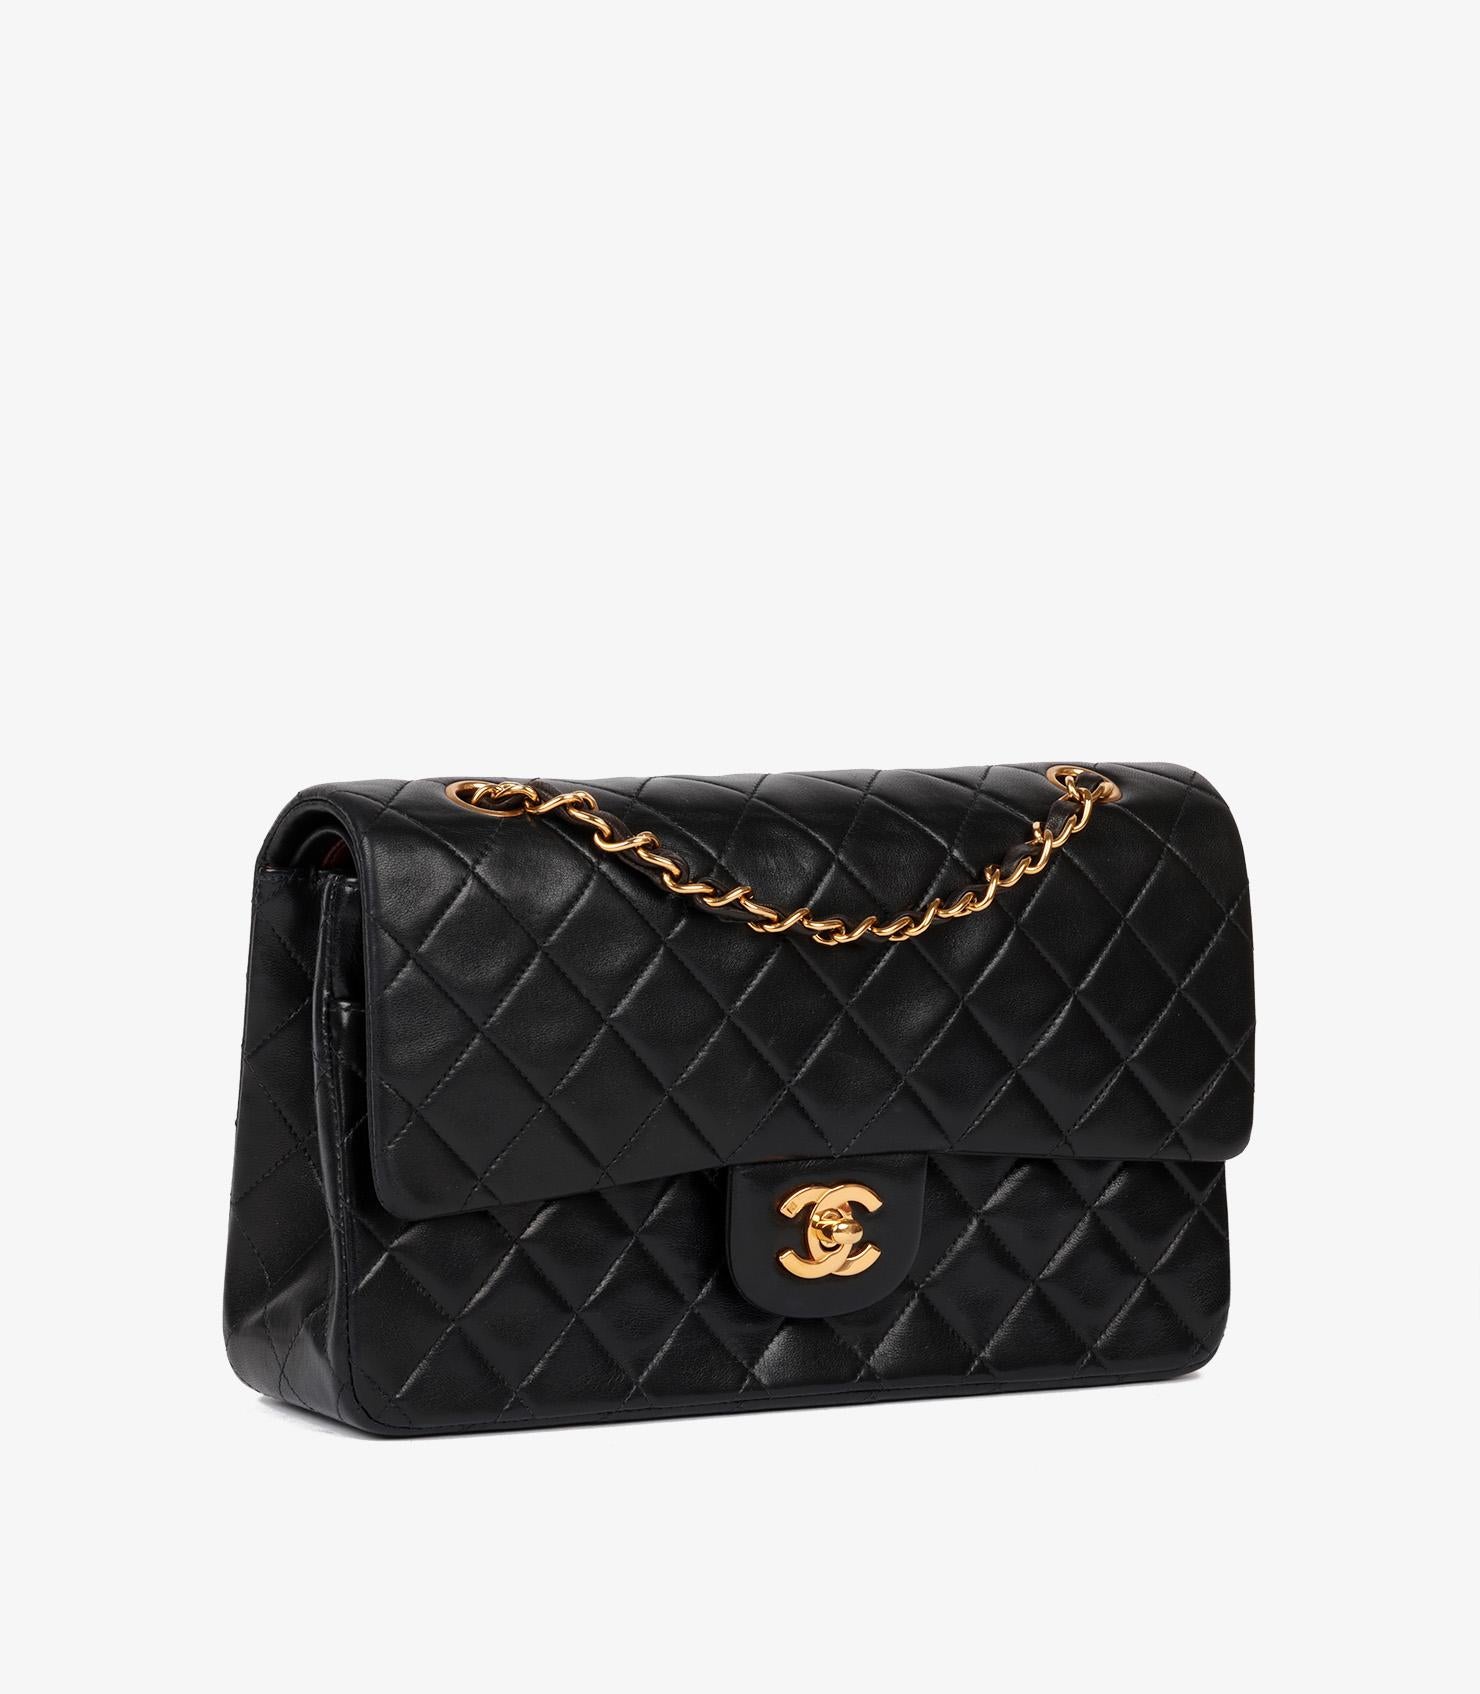 Chanel Black Quilted Lambskin Vintage Medium Classic Double Flap Bag

Brand- Chanel
Model- Medium Classic Double Flap Bag
Product Type- Shoulder
Serial Number- 39*****
Age- Circa 1994
Accompanied By- Chanel Dust Bag, Authenticity Card, Care